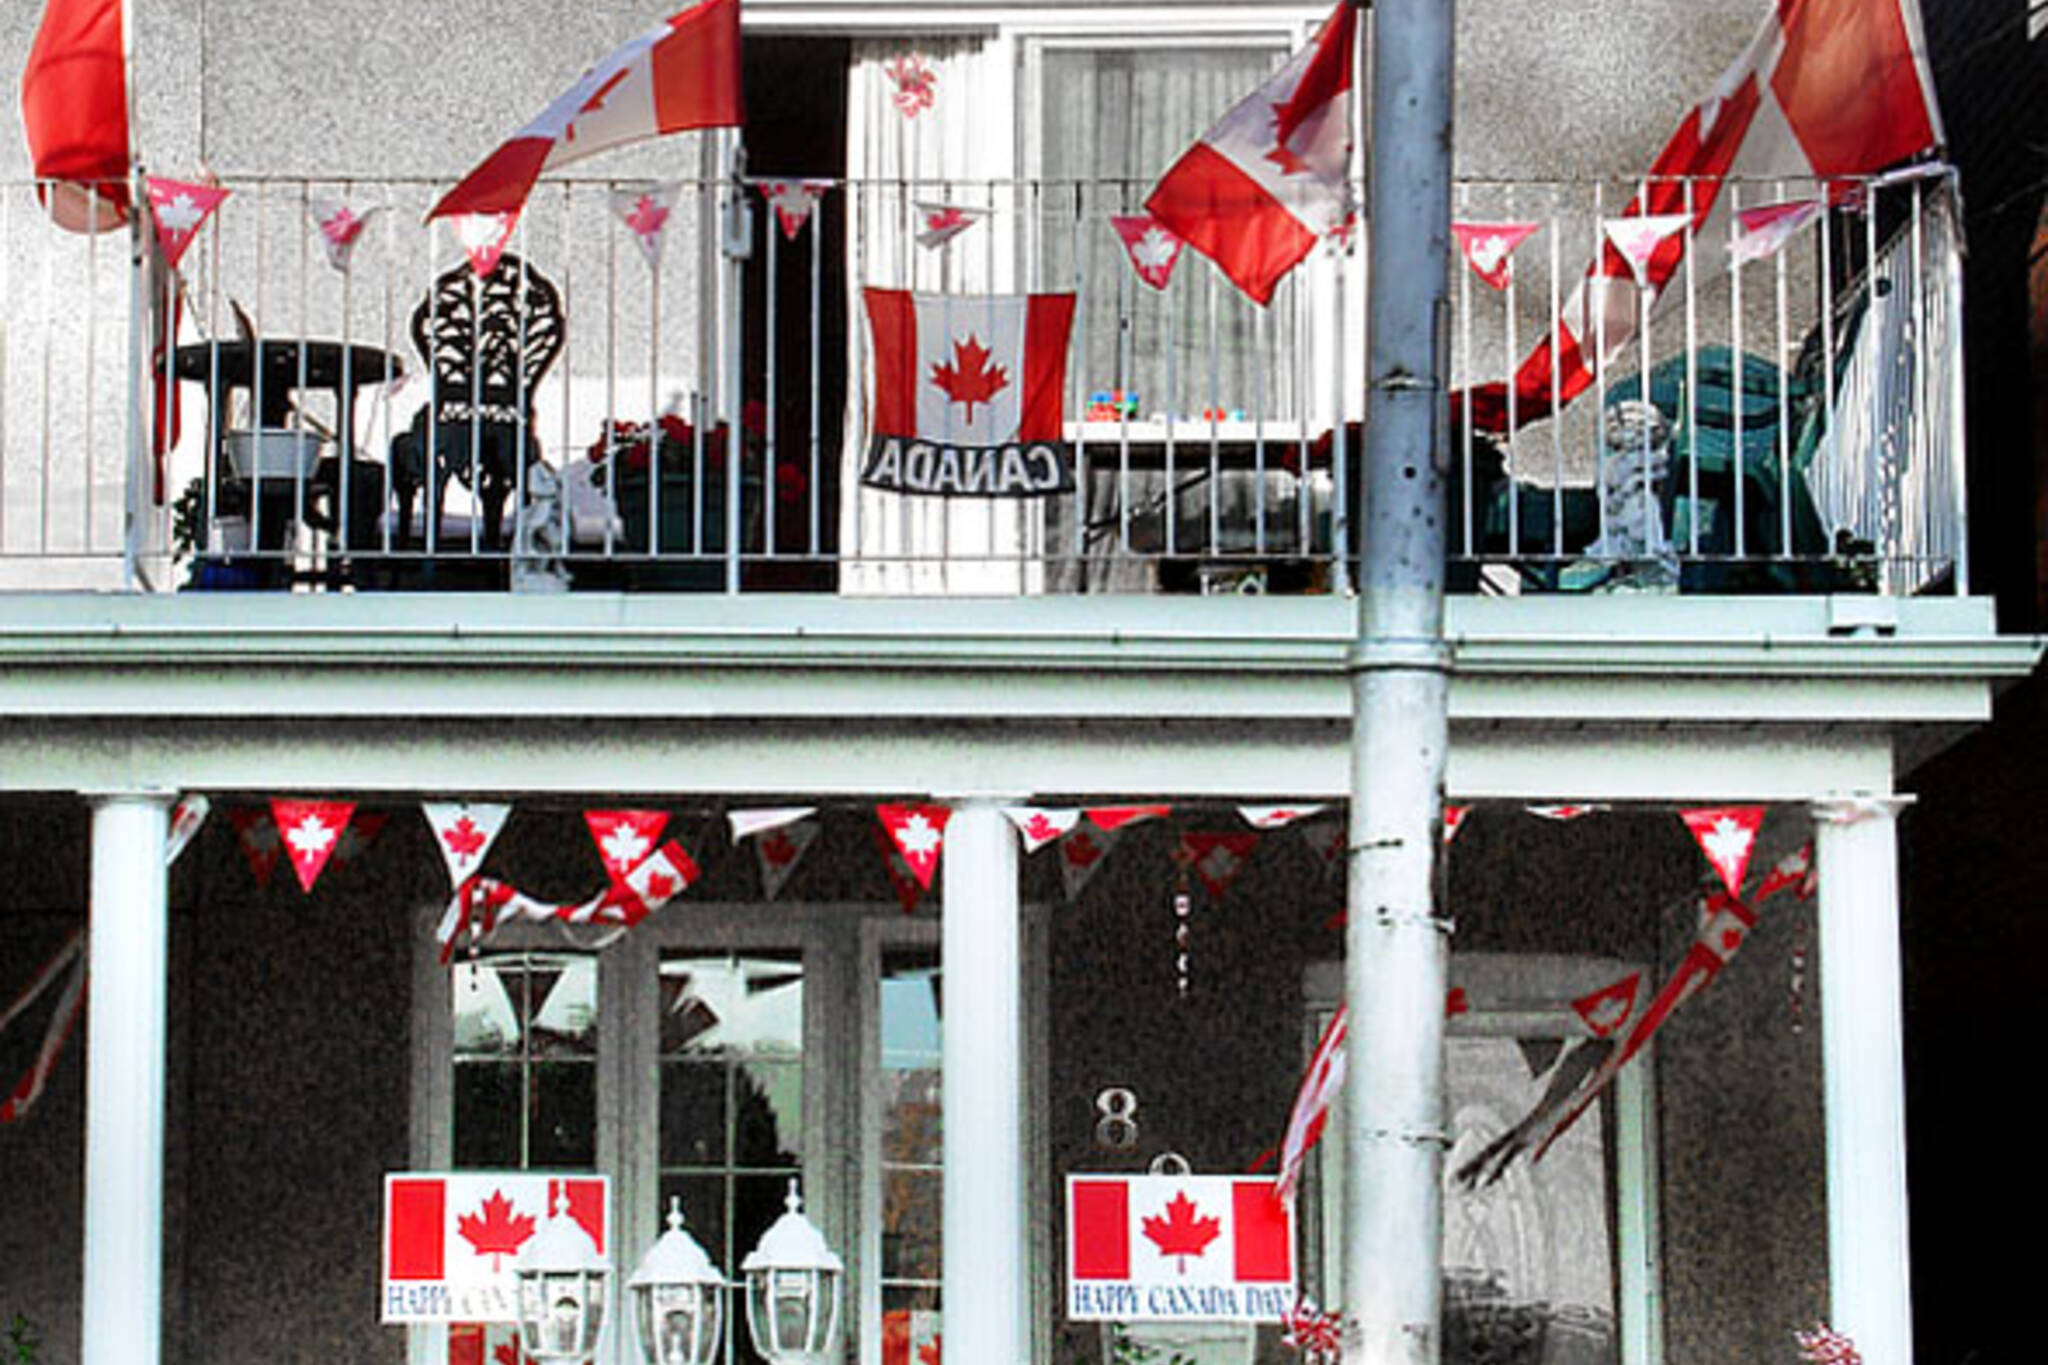 Canada Day decorations in Toronto